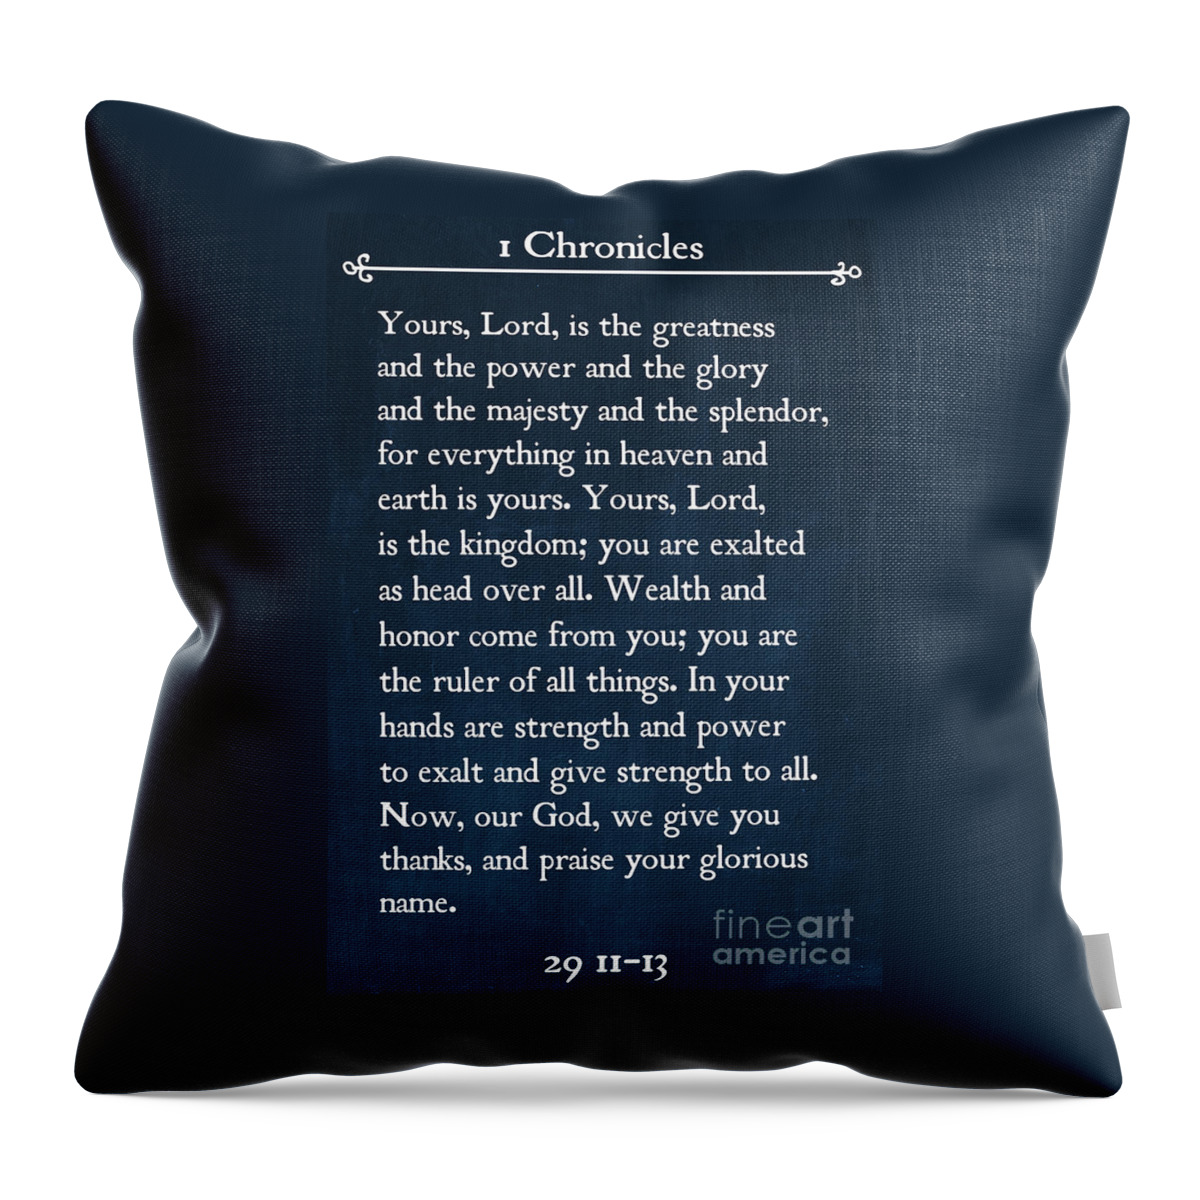 1 Chronicles Throw Pillow featuring the painting 1 Chronicles 29 11-13- Inspirational Quotes Wall Art Collection by Mark Lawrence